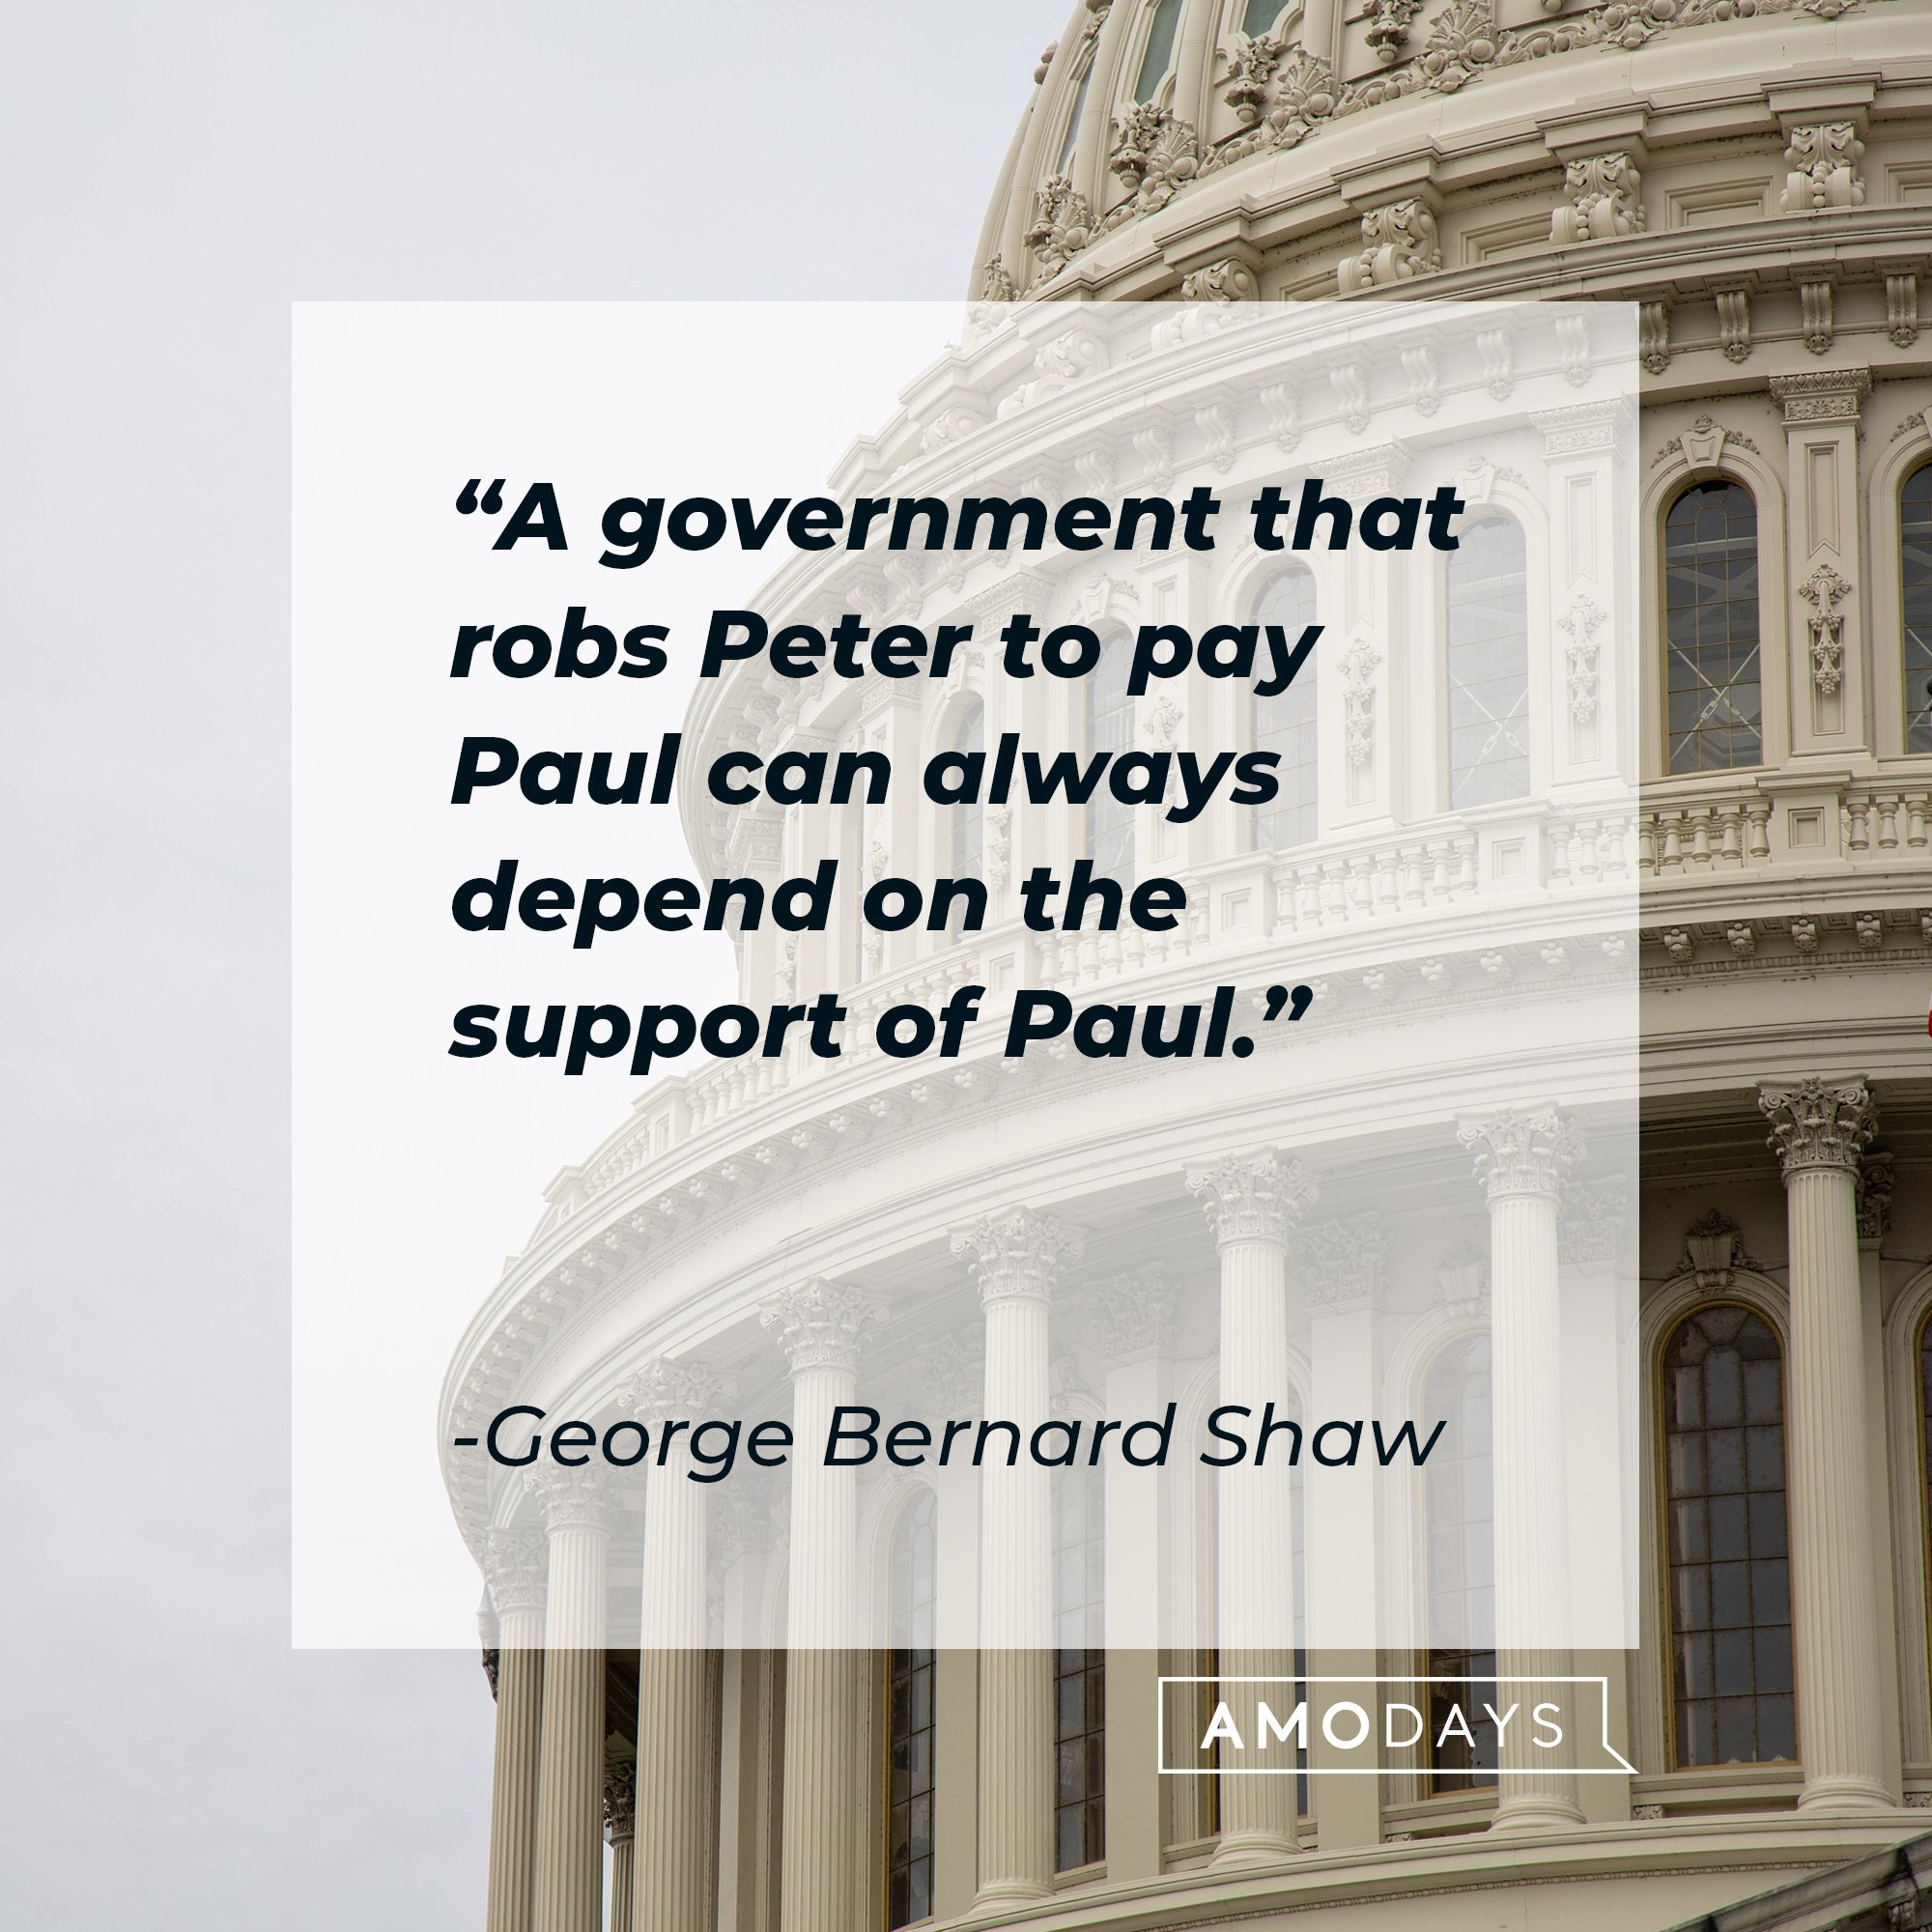 George Bernard Shaw’s quote: "A government that robs Peter to pay Paul can always depend on the support of Paul." | Image: AmoDays